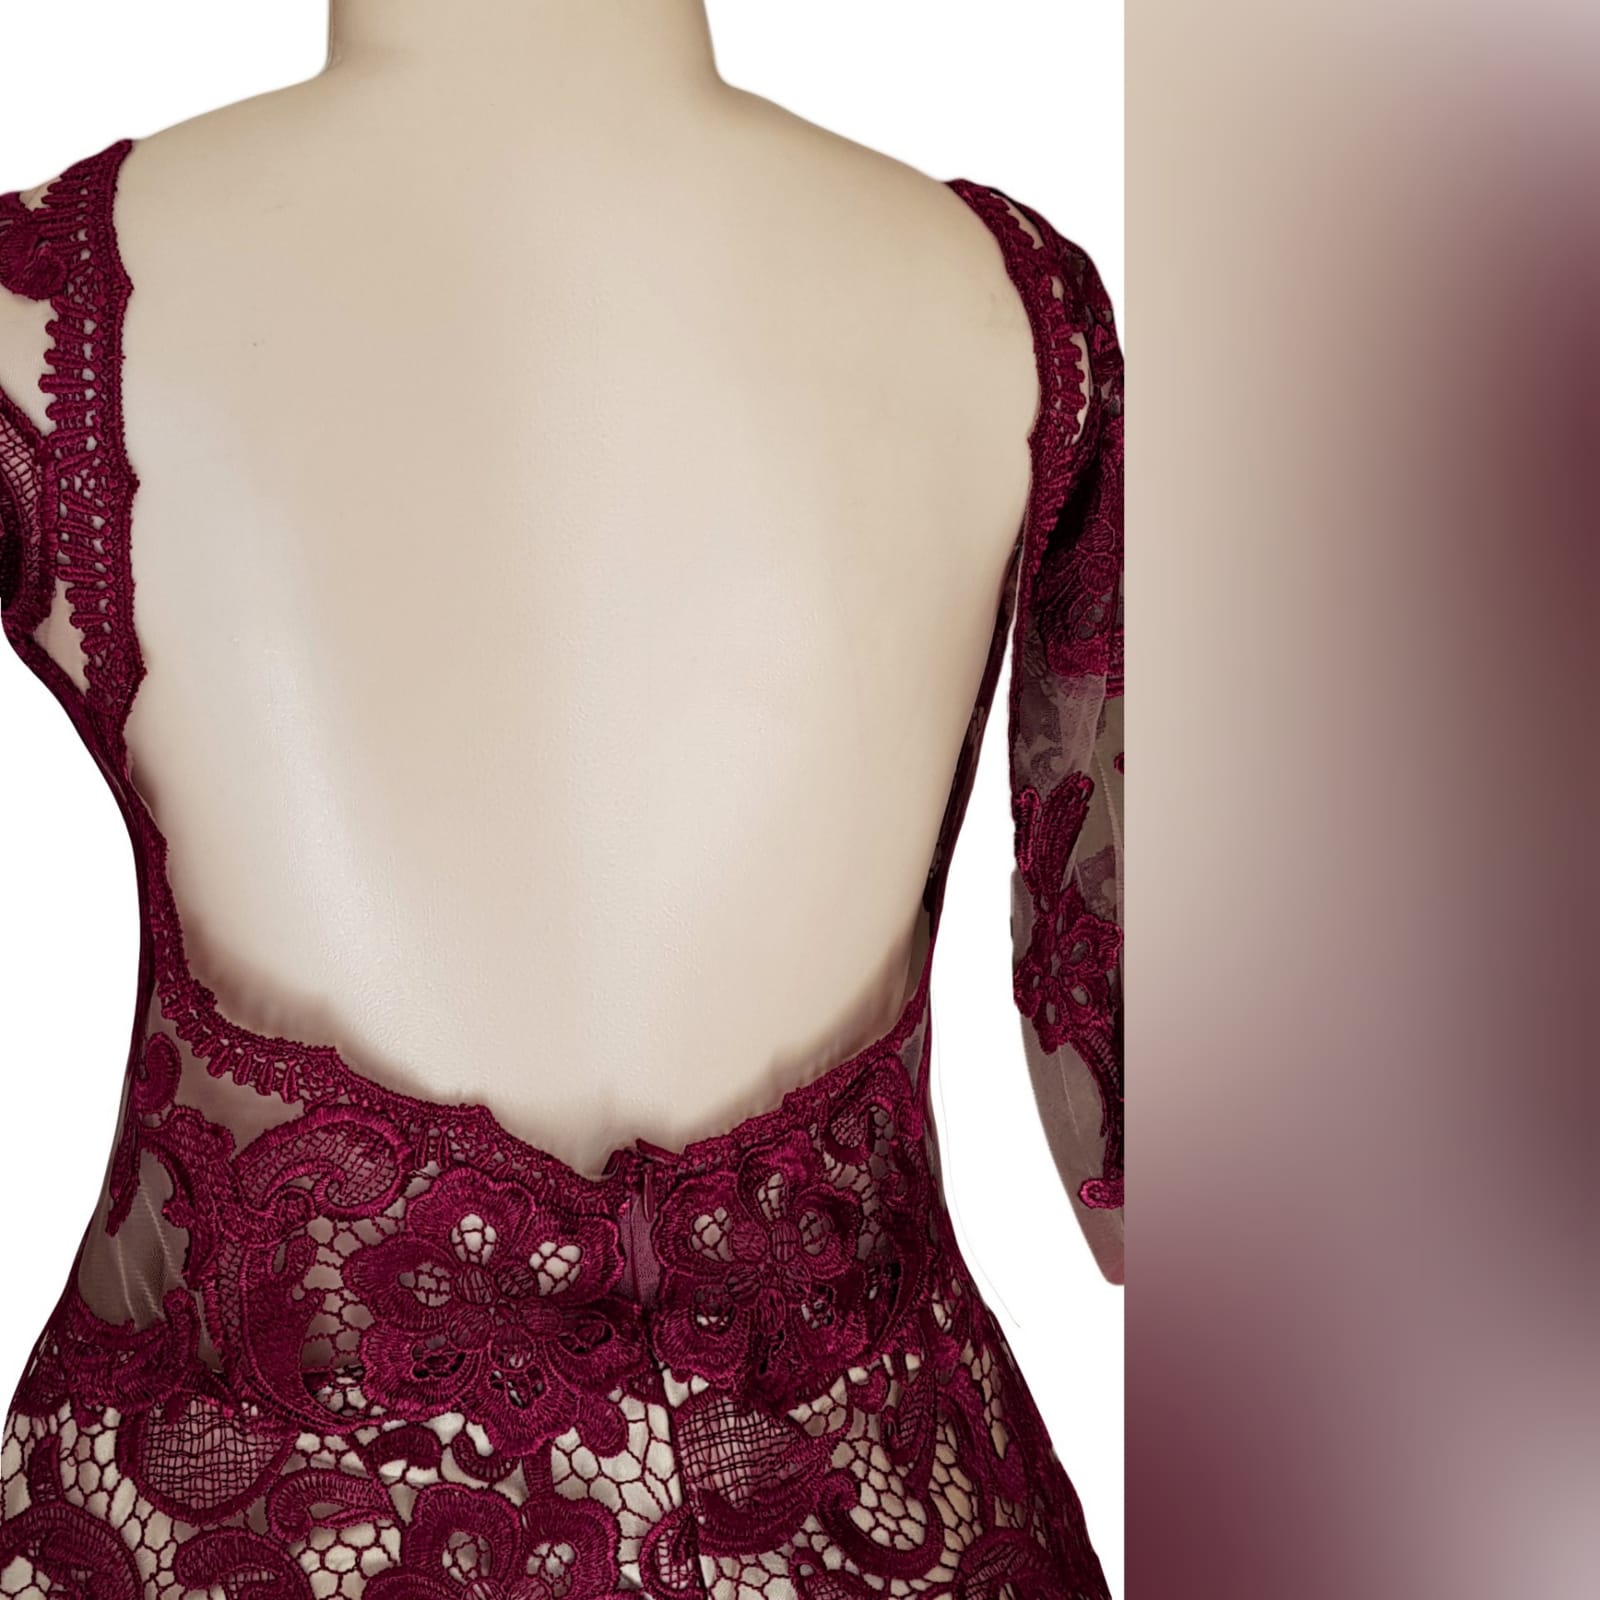 Tight to the hip burgundy & nude lace prom dress 4 burgundy & nude lace prom dress, fitted to the hip, with sheer flowy legs, with a slit and a train. Rounded illusion open back and plunging neckline with 3/4 sleeves.